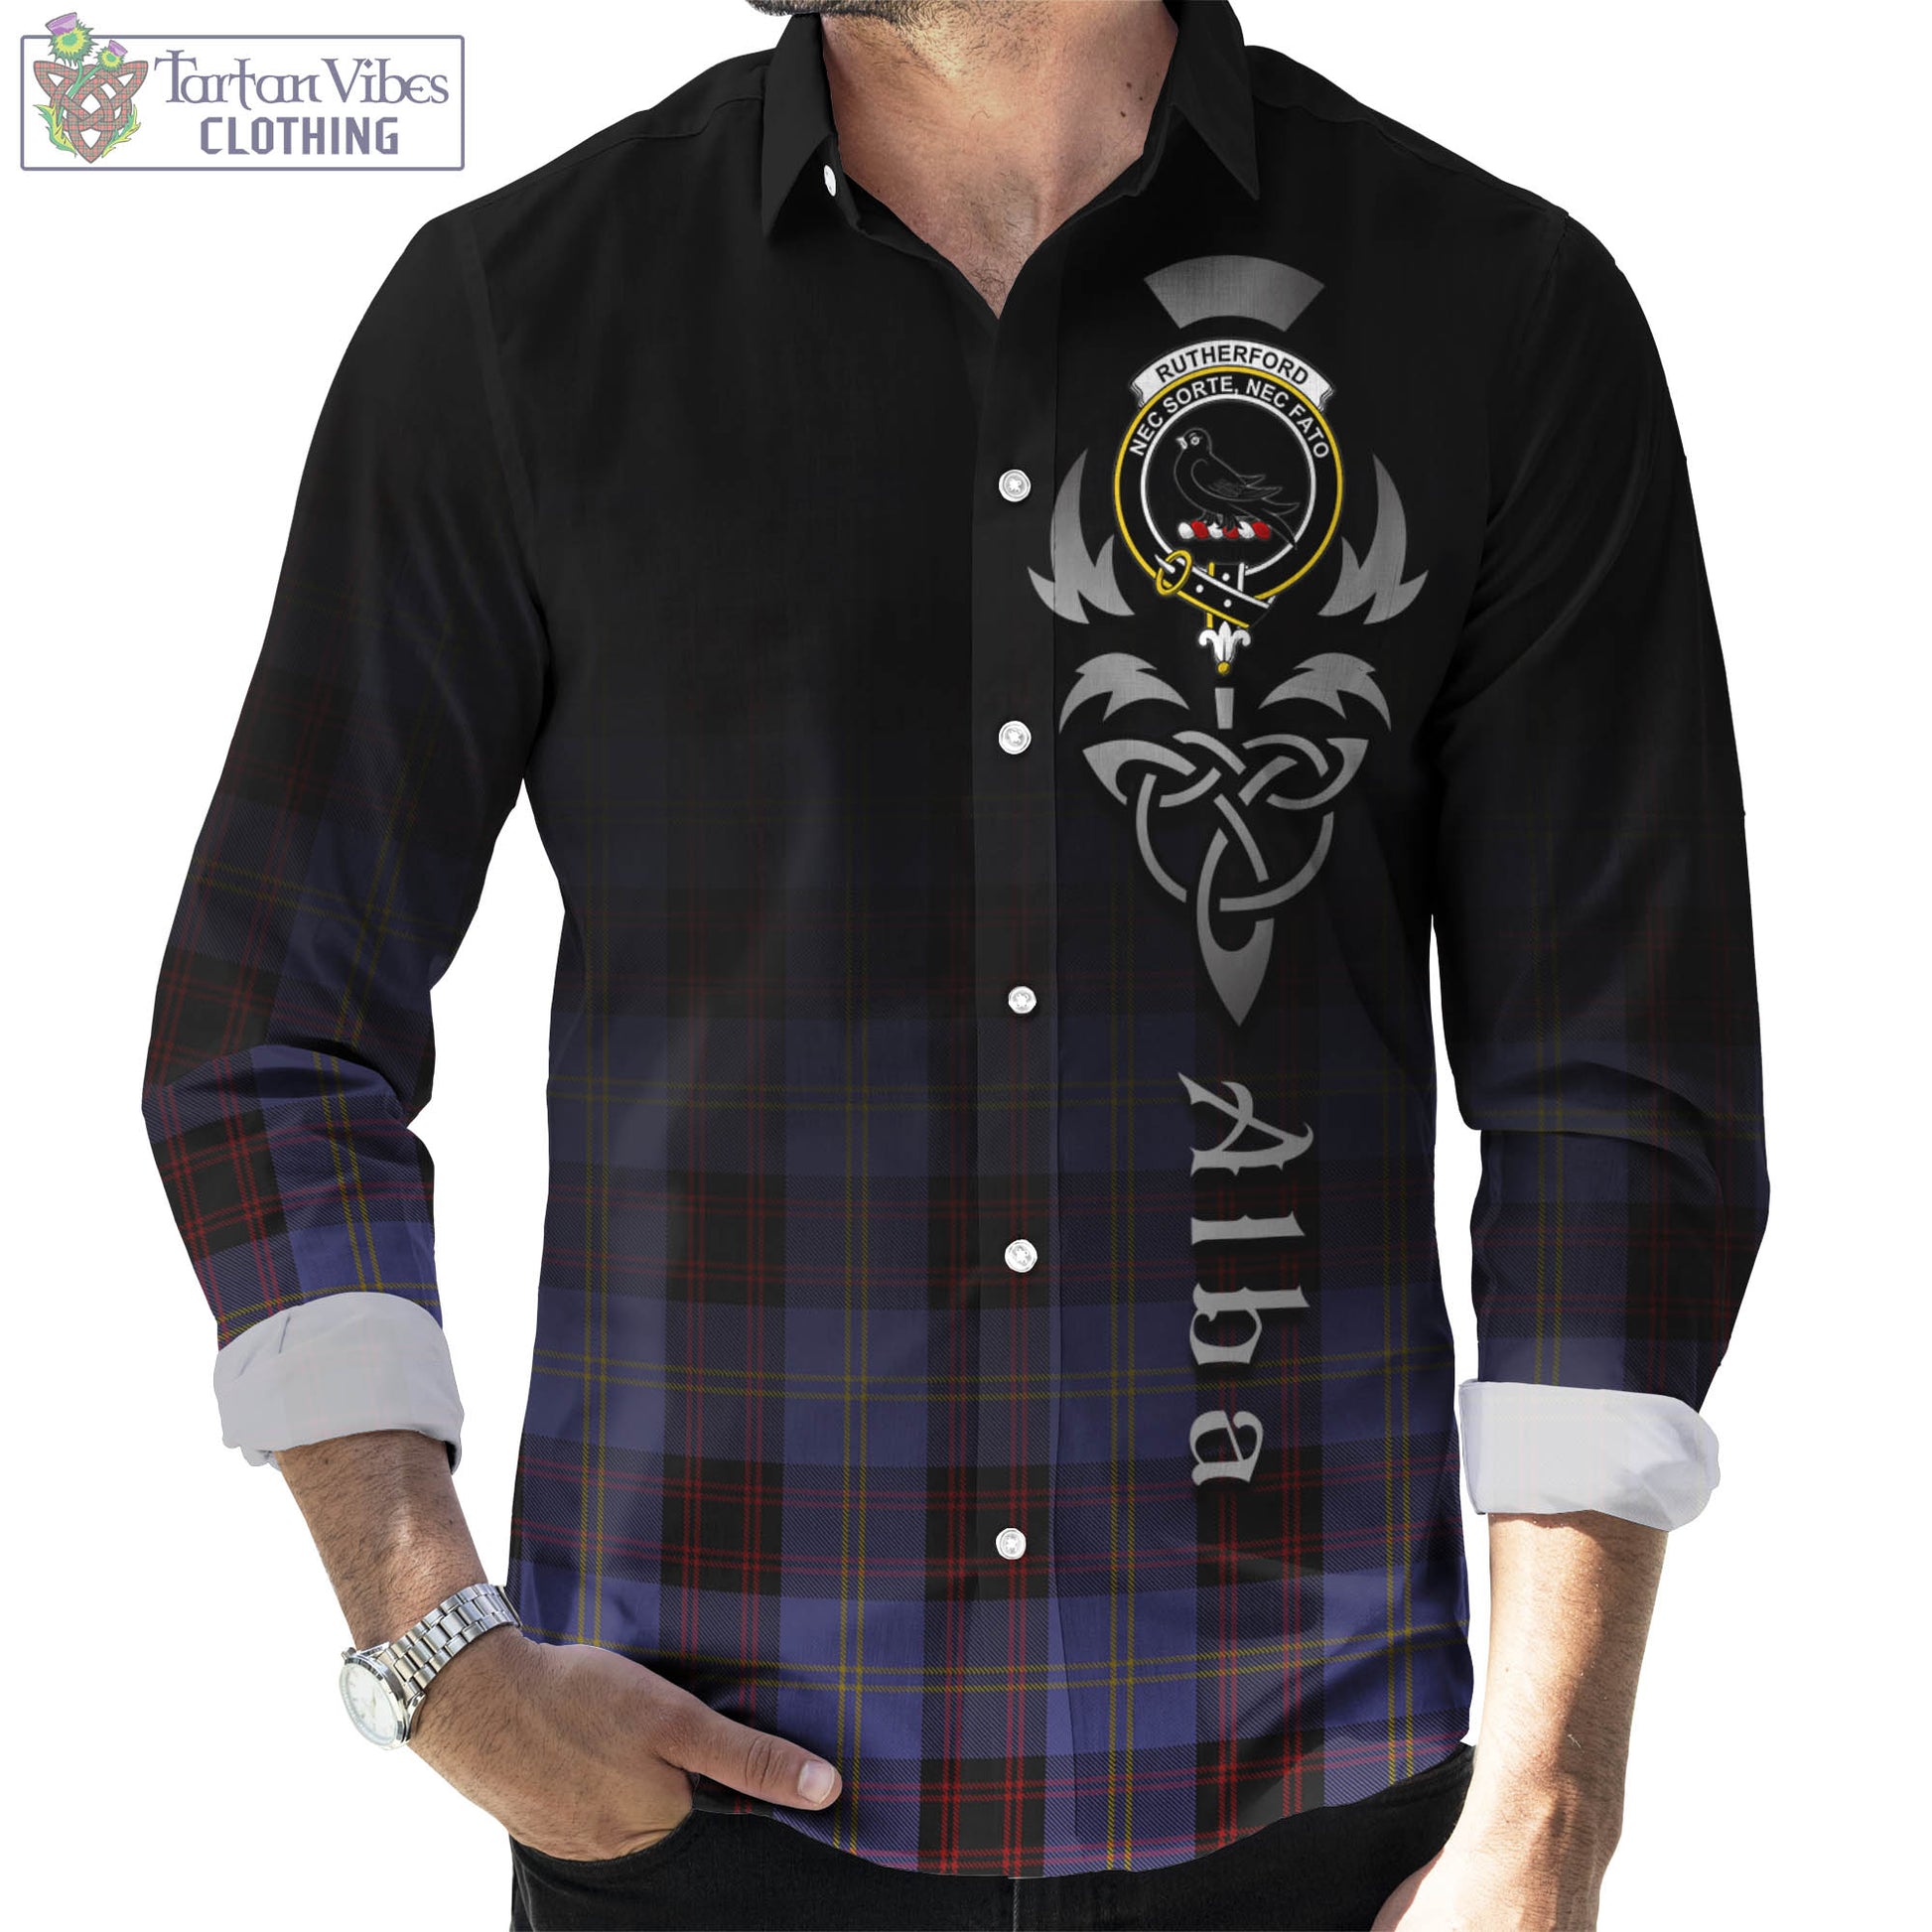 Tartan Vibes Clothing Rutherford Tartan Long Sleeve Button Up Featuring Alba Gu Brath Family Crest Celtic Inspired